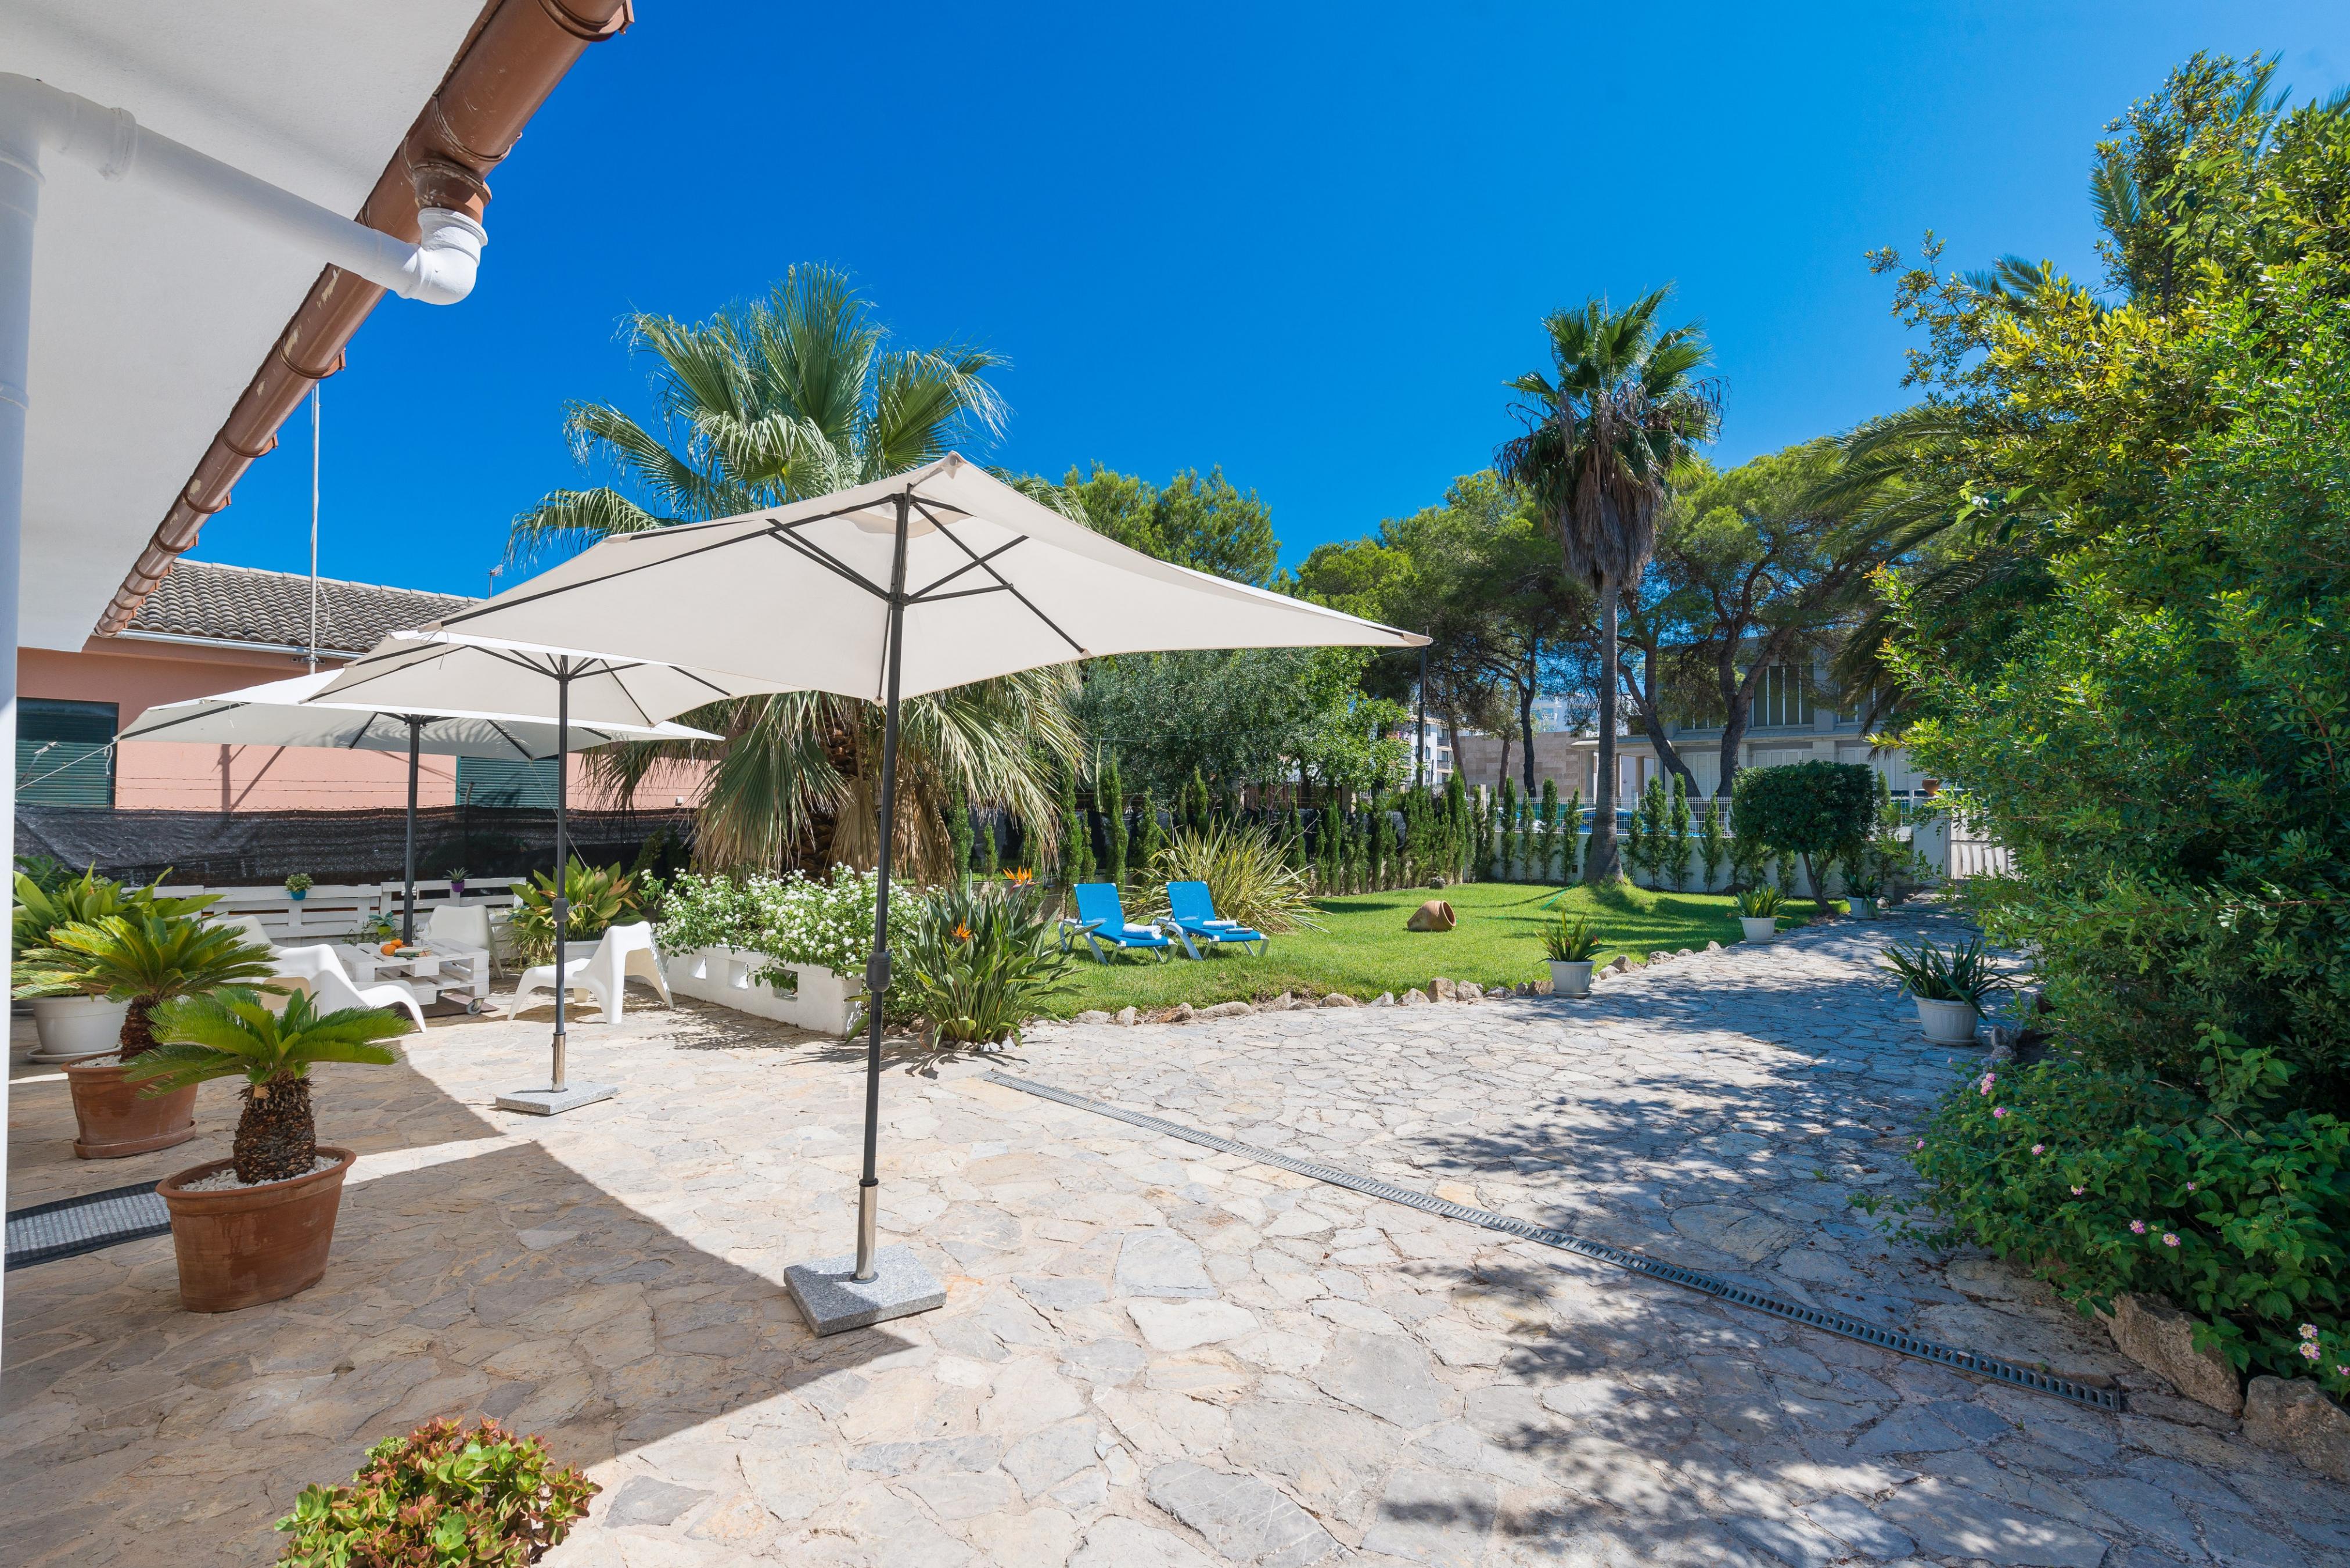 Property Image 2 - CAN BLAU - Cosy chalet with garden and terraces near the beach. Free WiFi